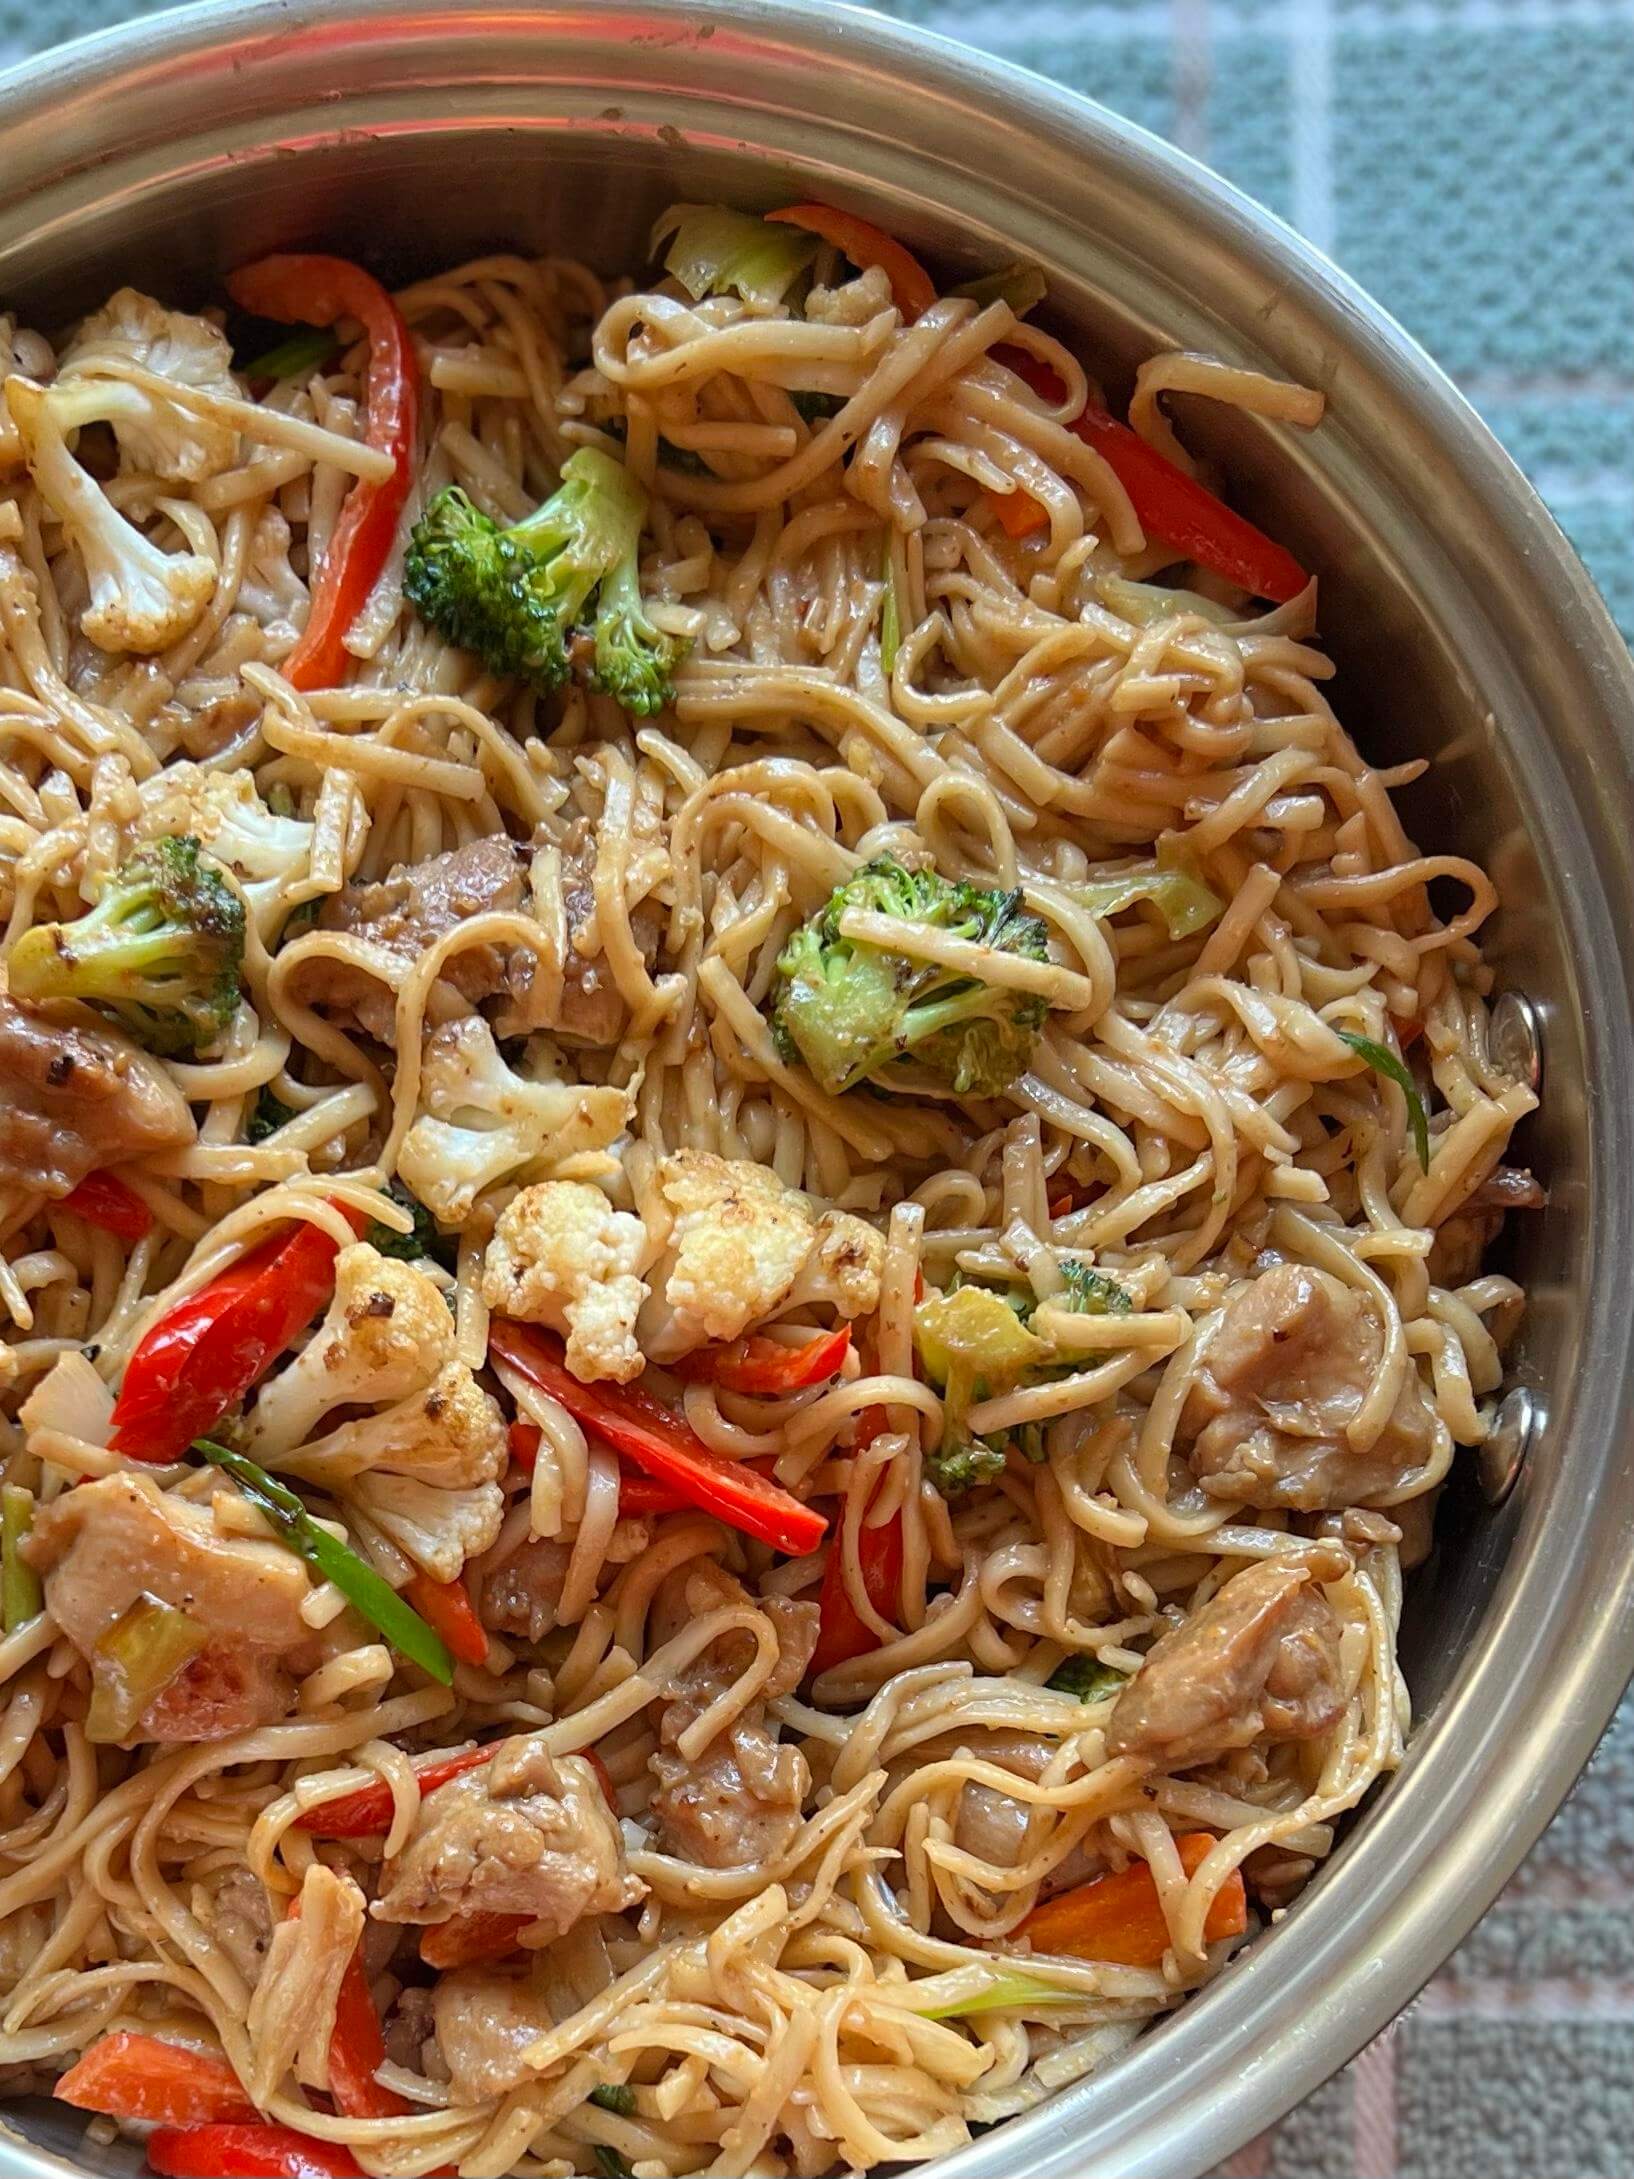 Stir-Fried Chicken & Vegetables With Udon Noodles In Peanut Sauce